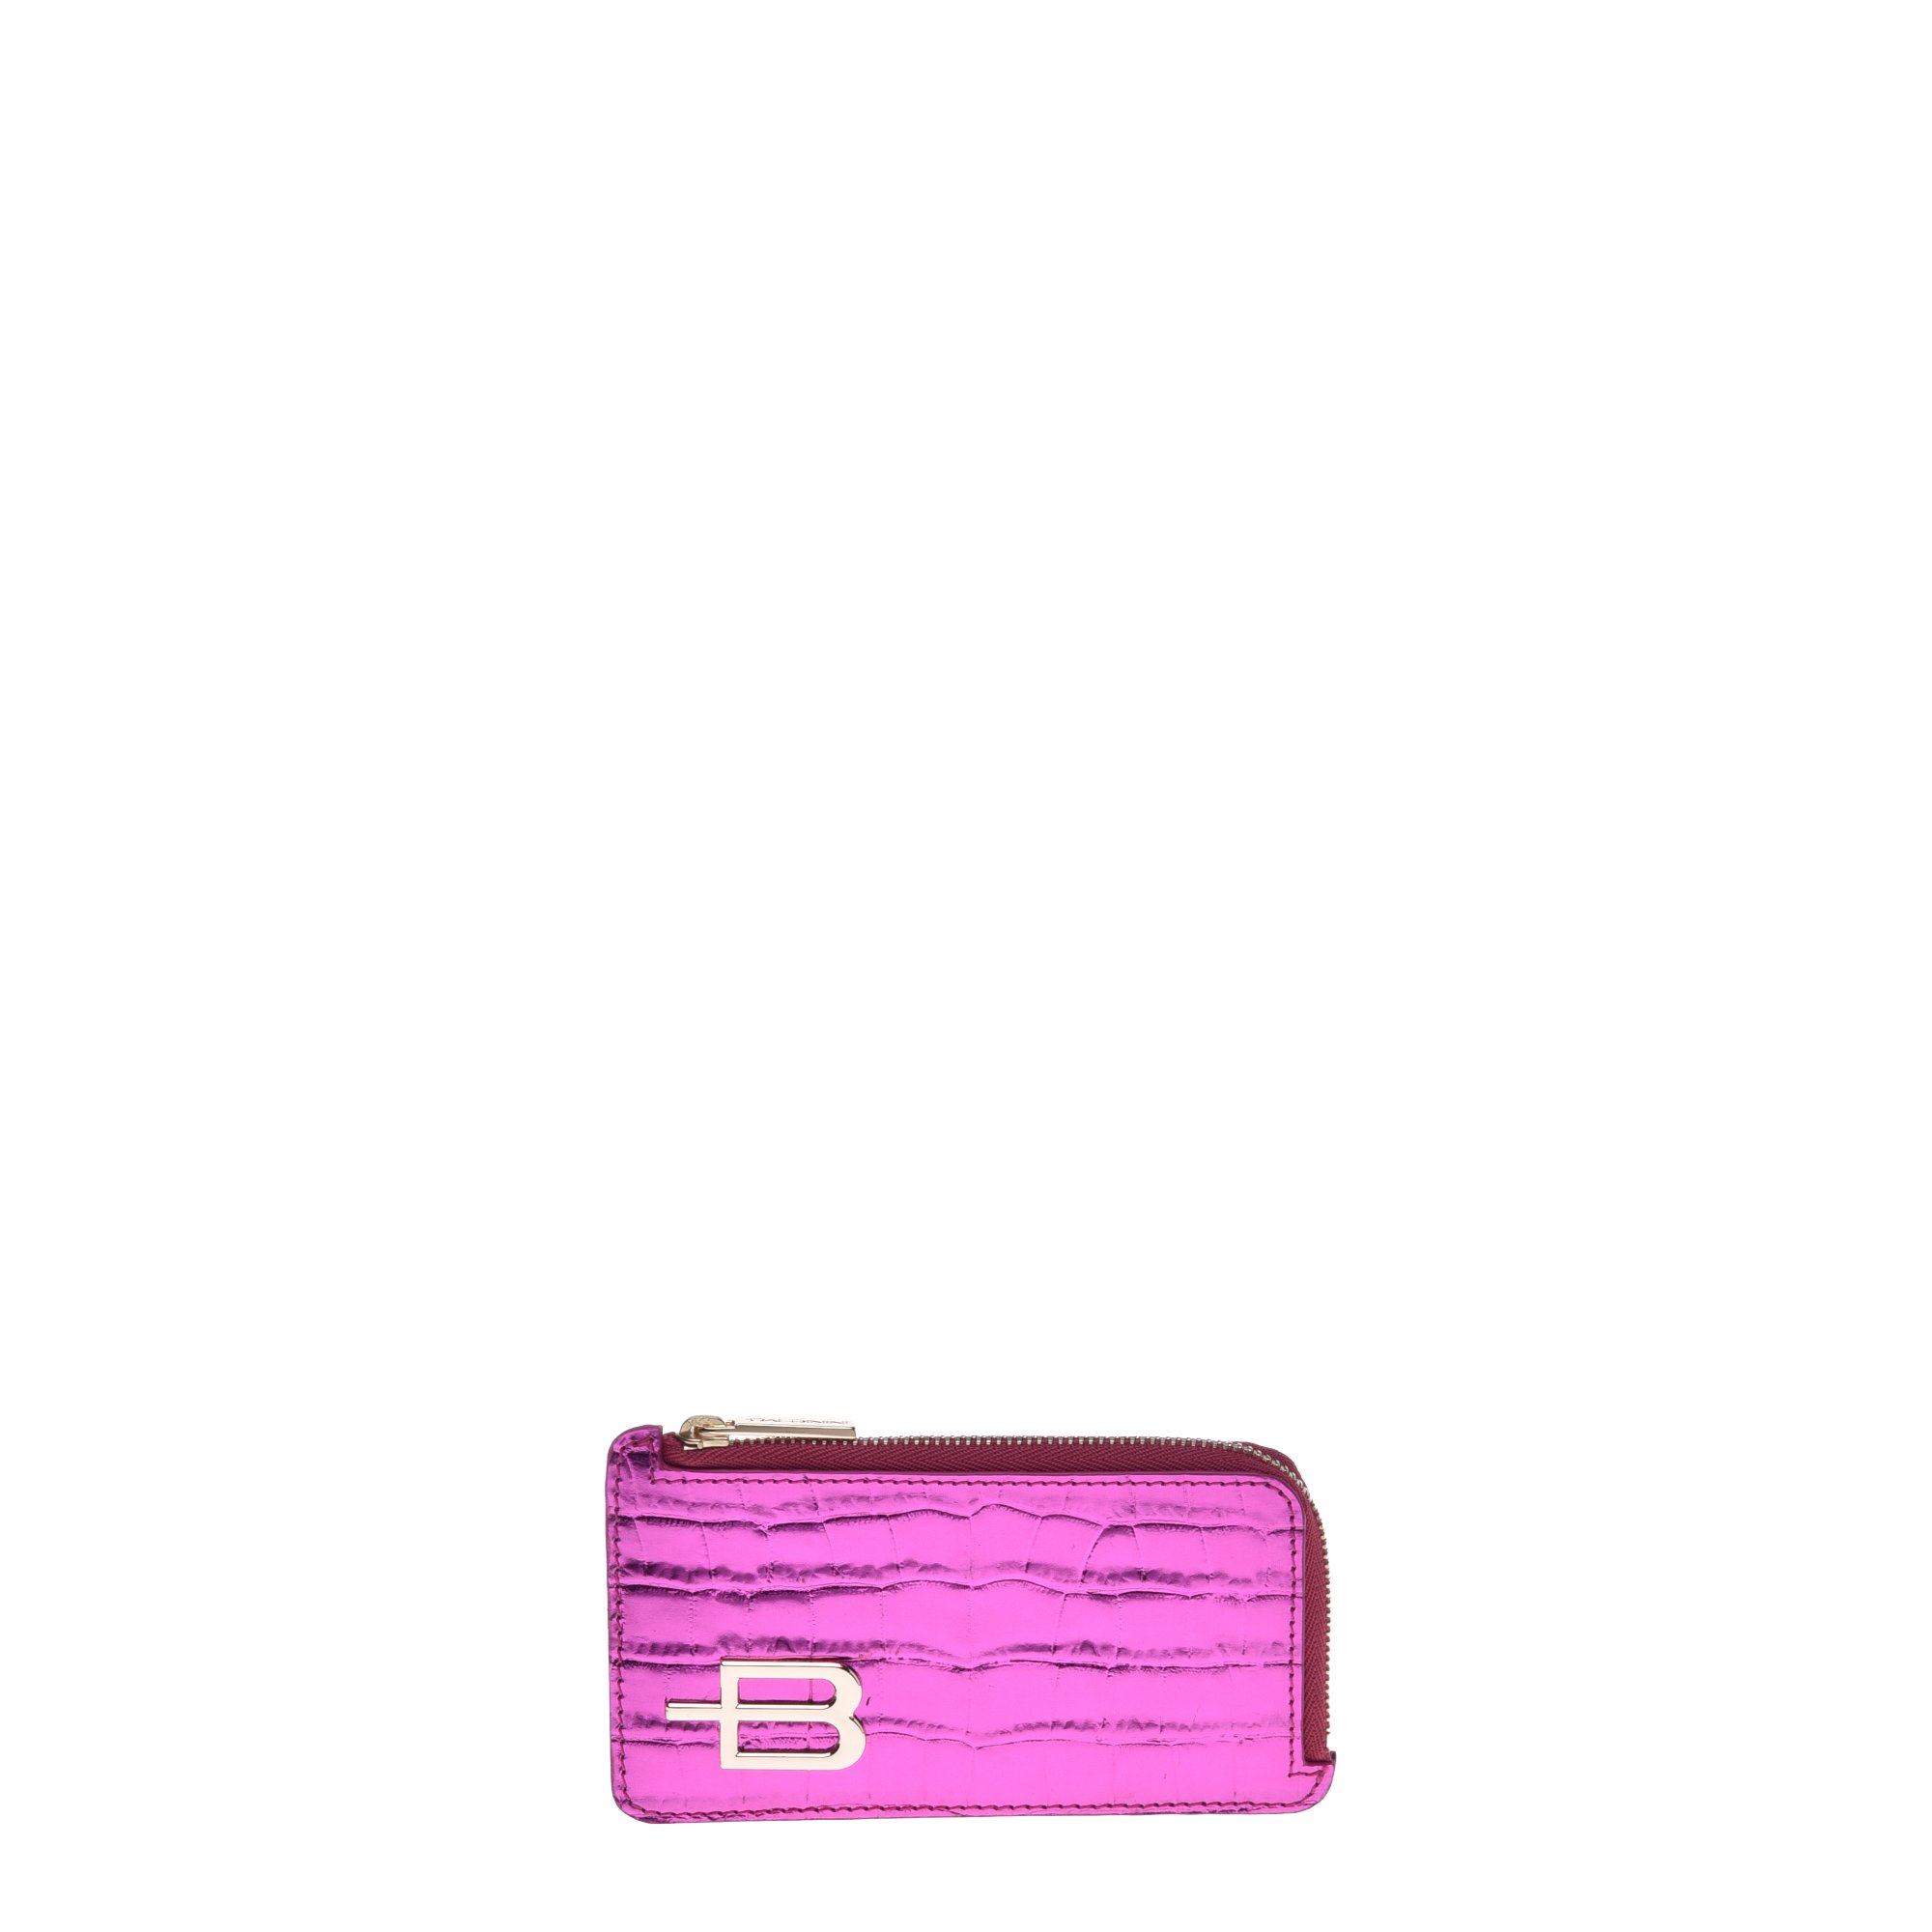 Wallet in fuchsia with laminated crocodile print image